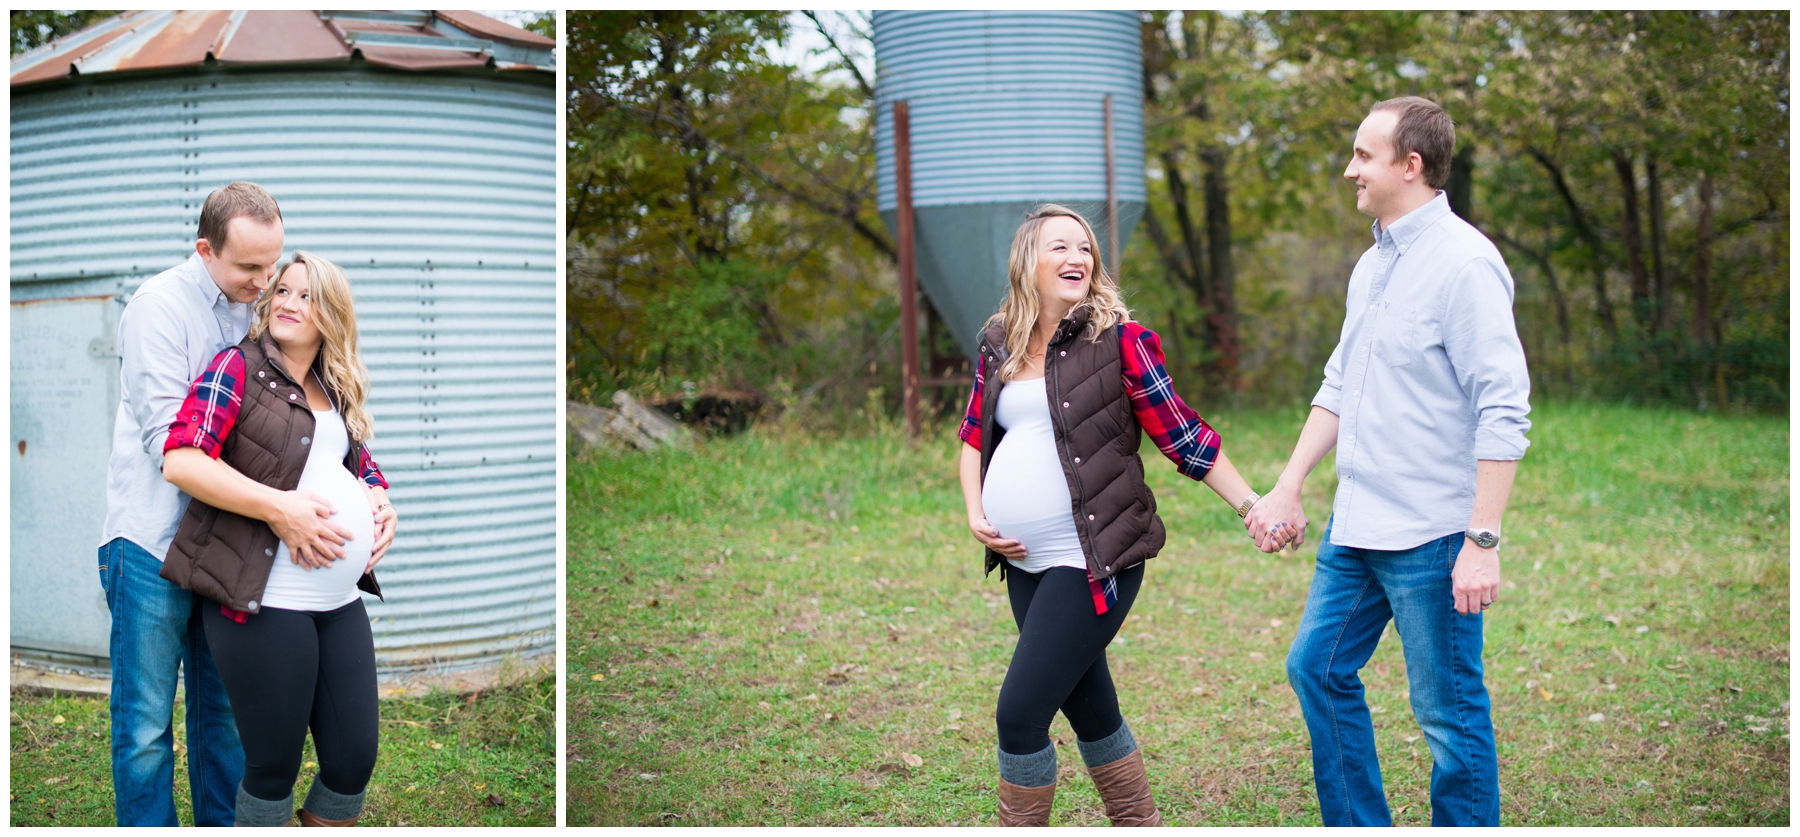 natural-fall-maternity-pictures-wheat-fields-and-vines-kansas-city-family-photographer_0023